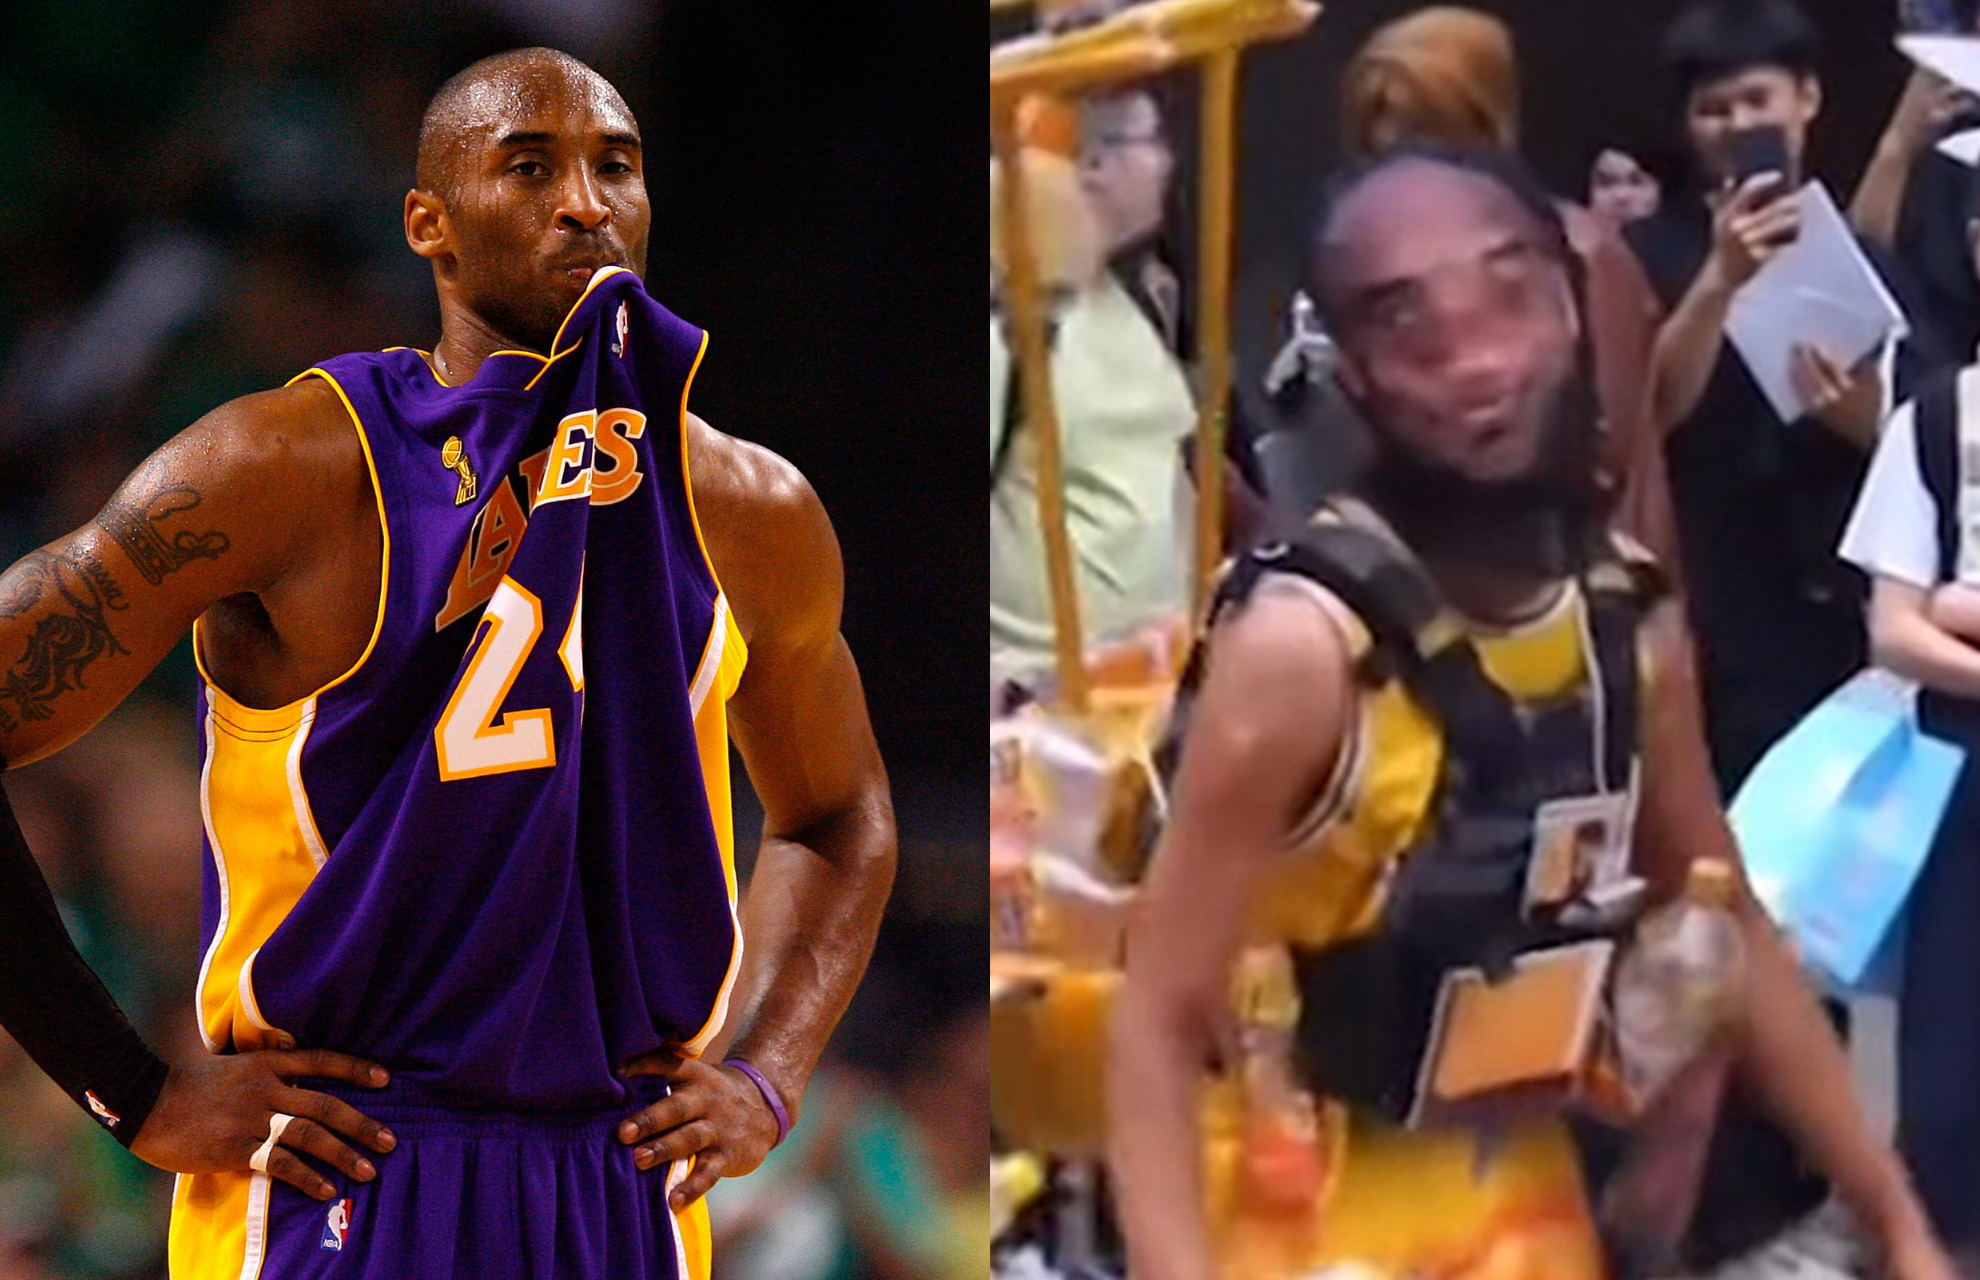 Distasteful Kobe Bryant Costume Appears At Chinese Comic Con, Causing Massive Backlash